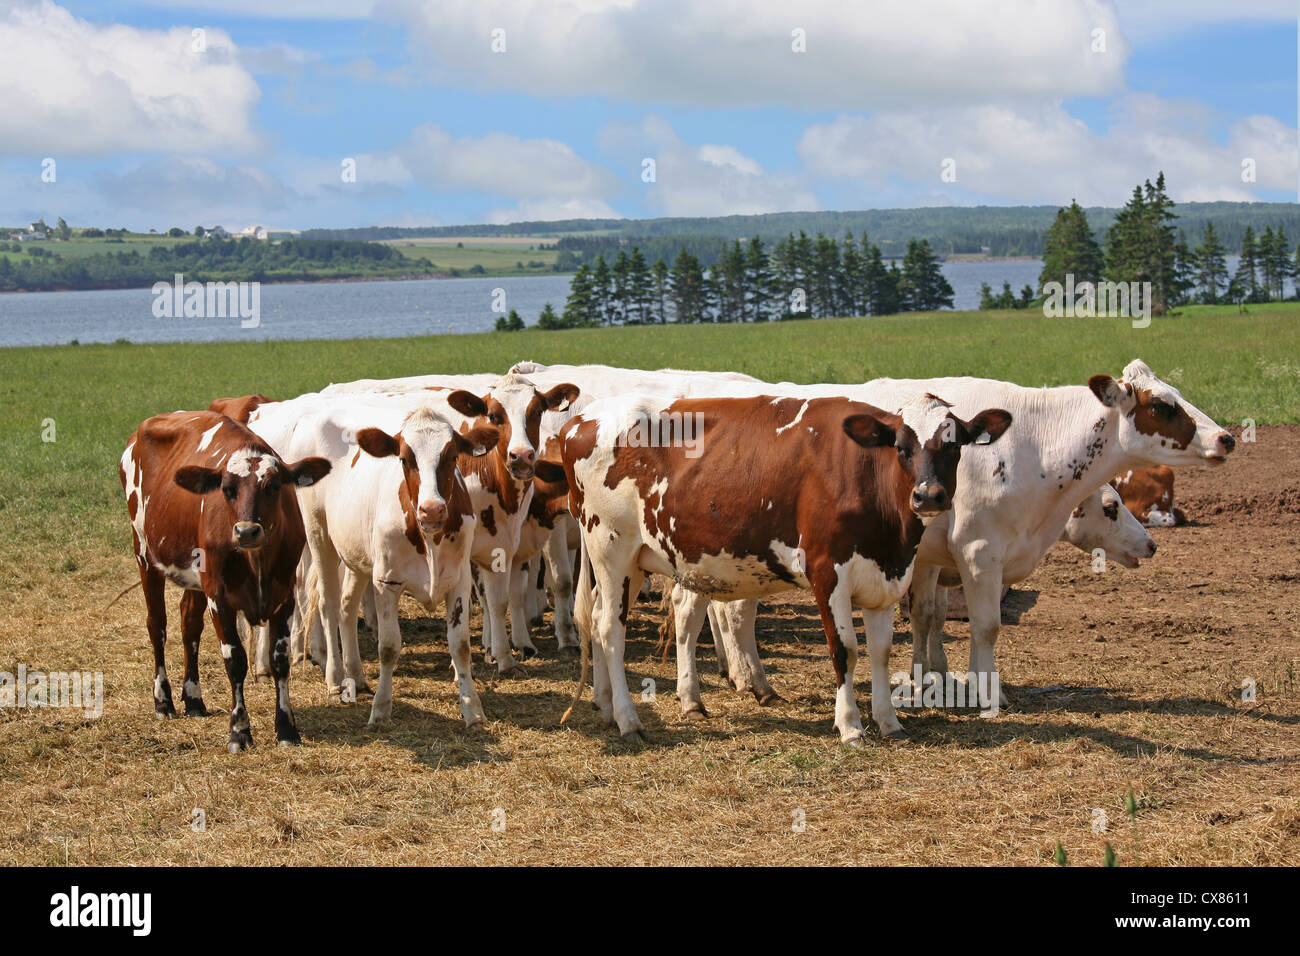 A herd of Ayrshire cattle in rural Prince Edward Island, Canada. Stock Photo